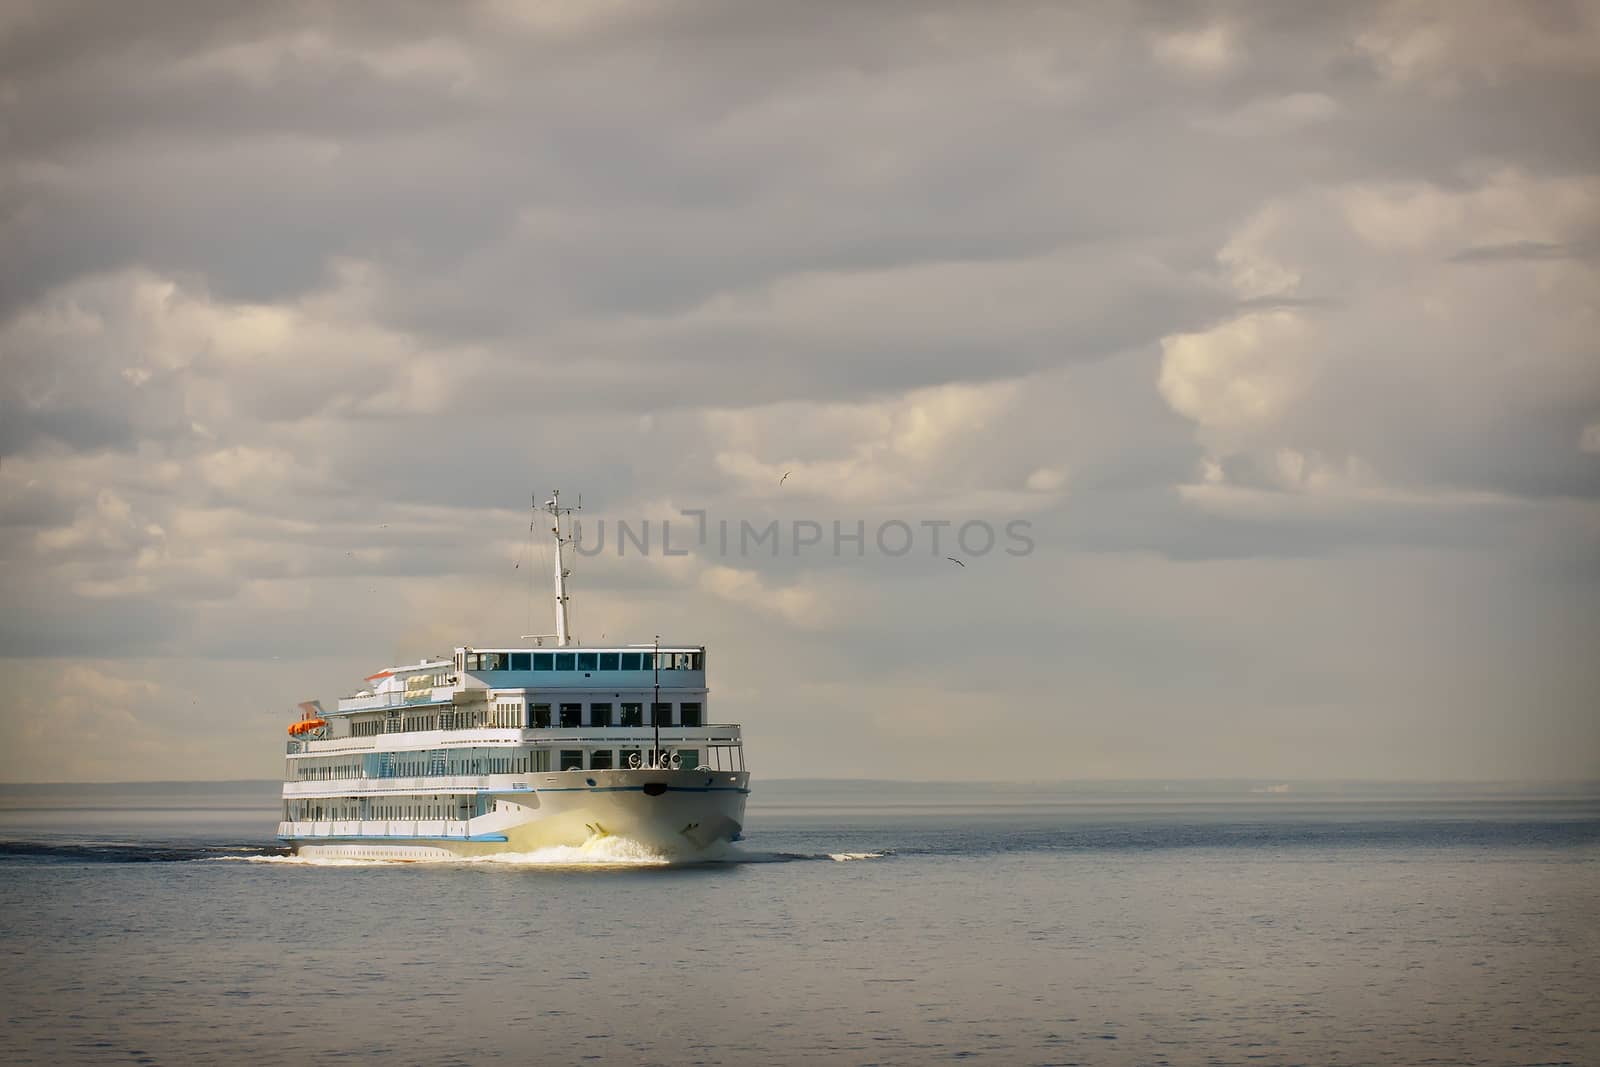 Cruise ship in open water front view